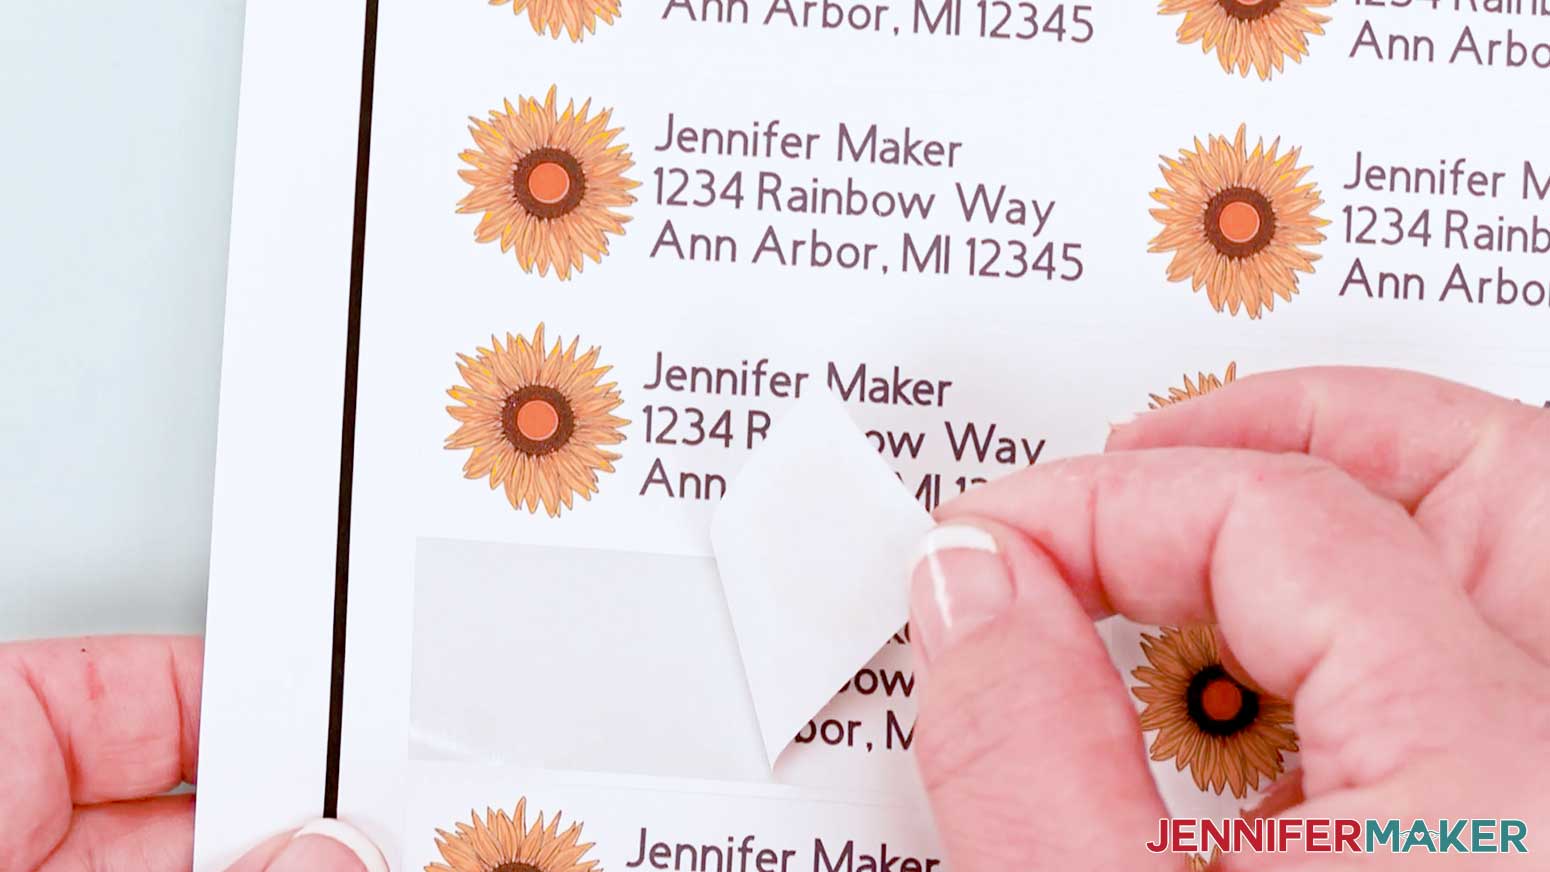 peel off address sticker label to make cute personalized stickers